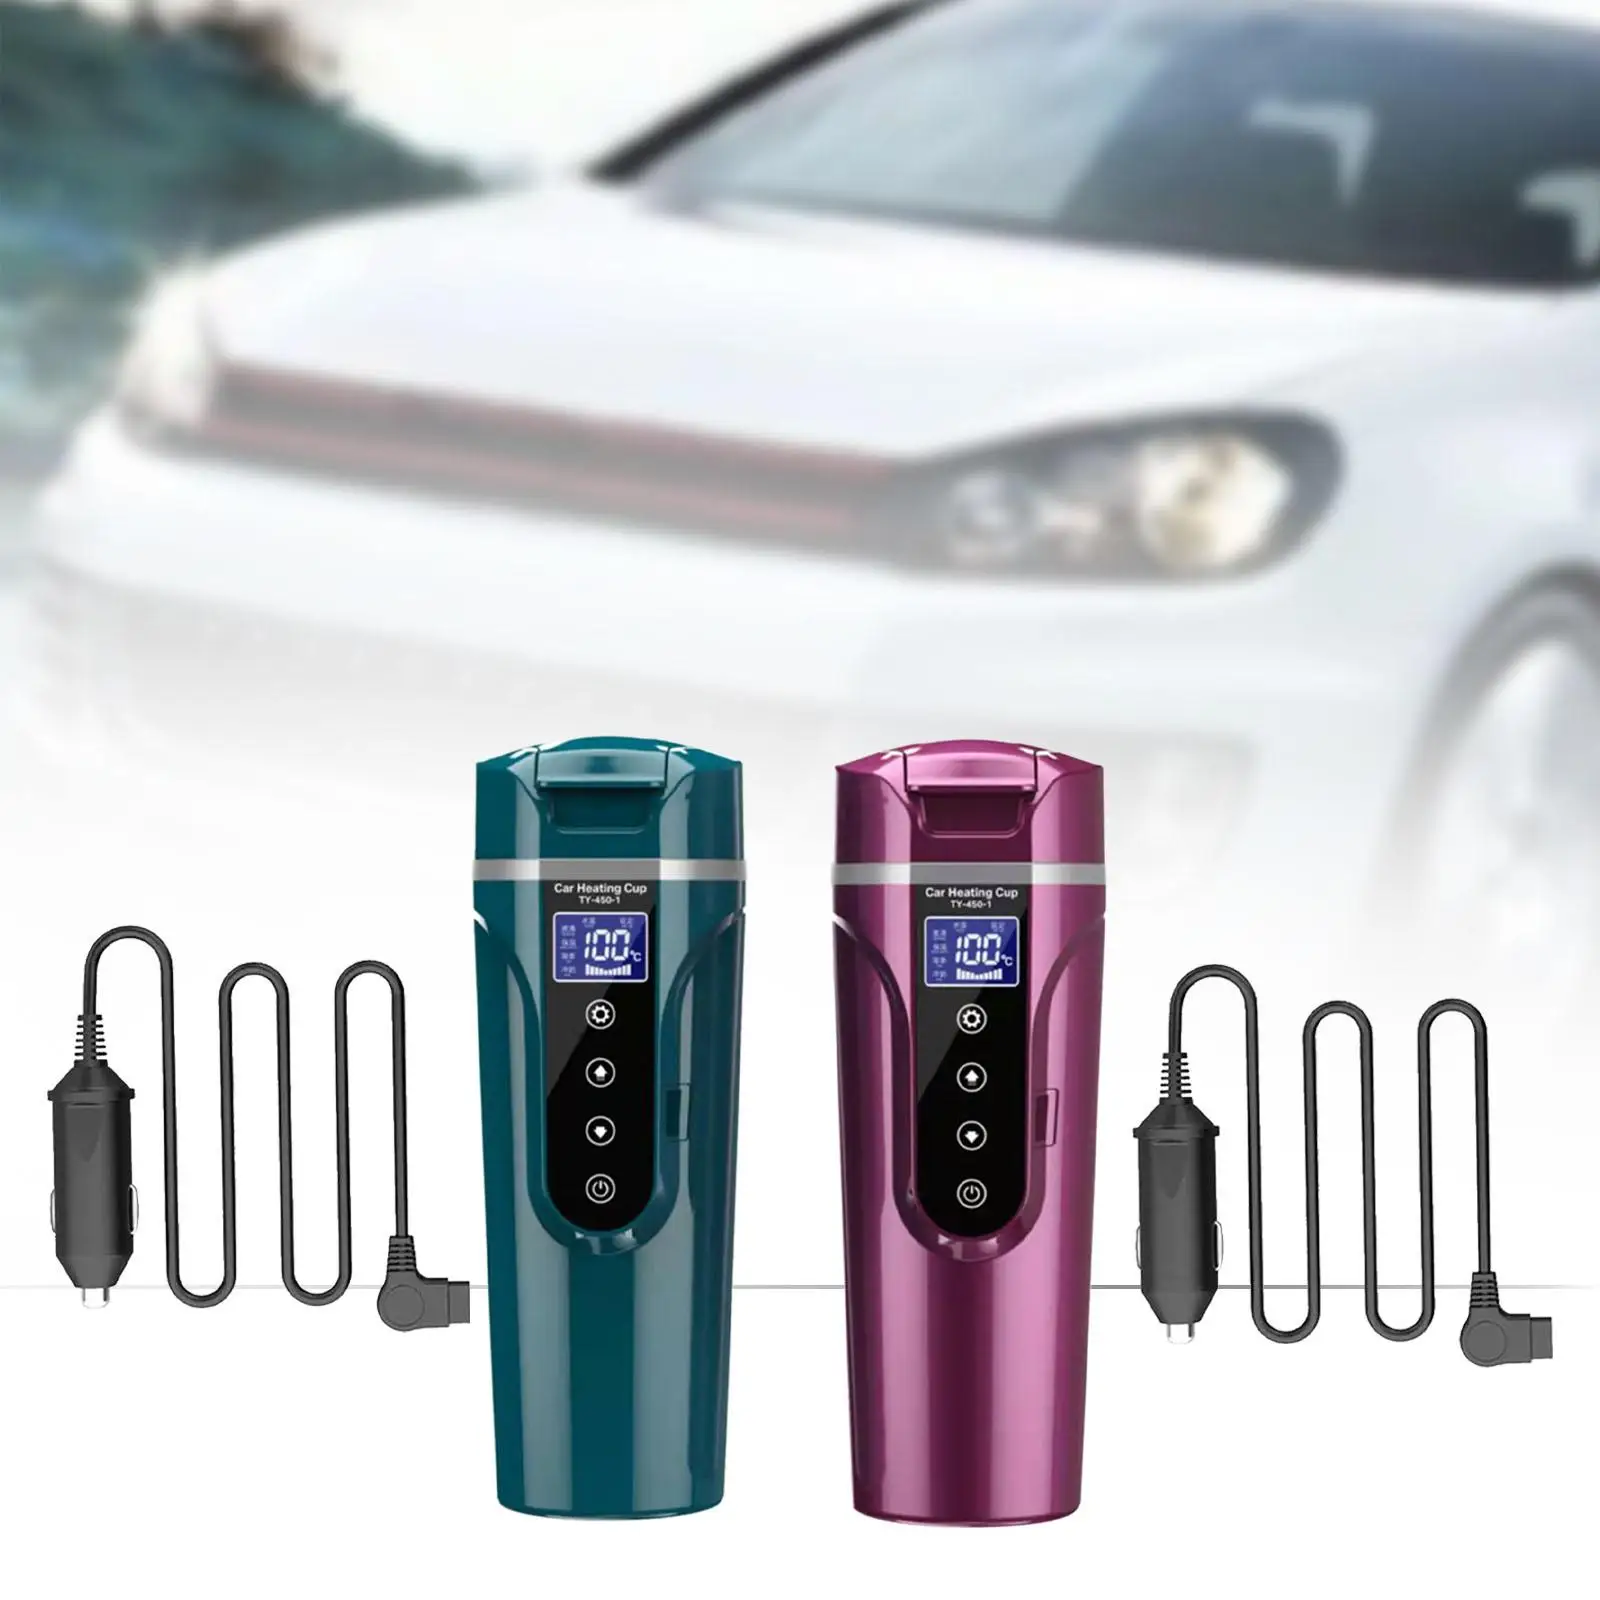 12V/24V Travel Car Truck Kettle Car Heating Cup for Coffee Milk Travel